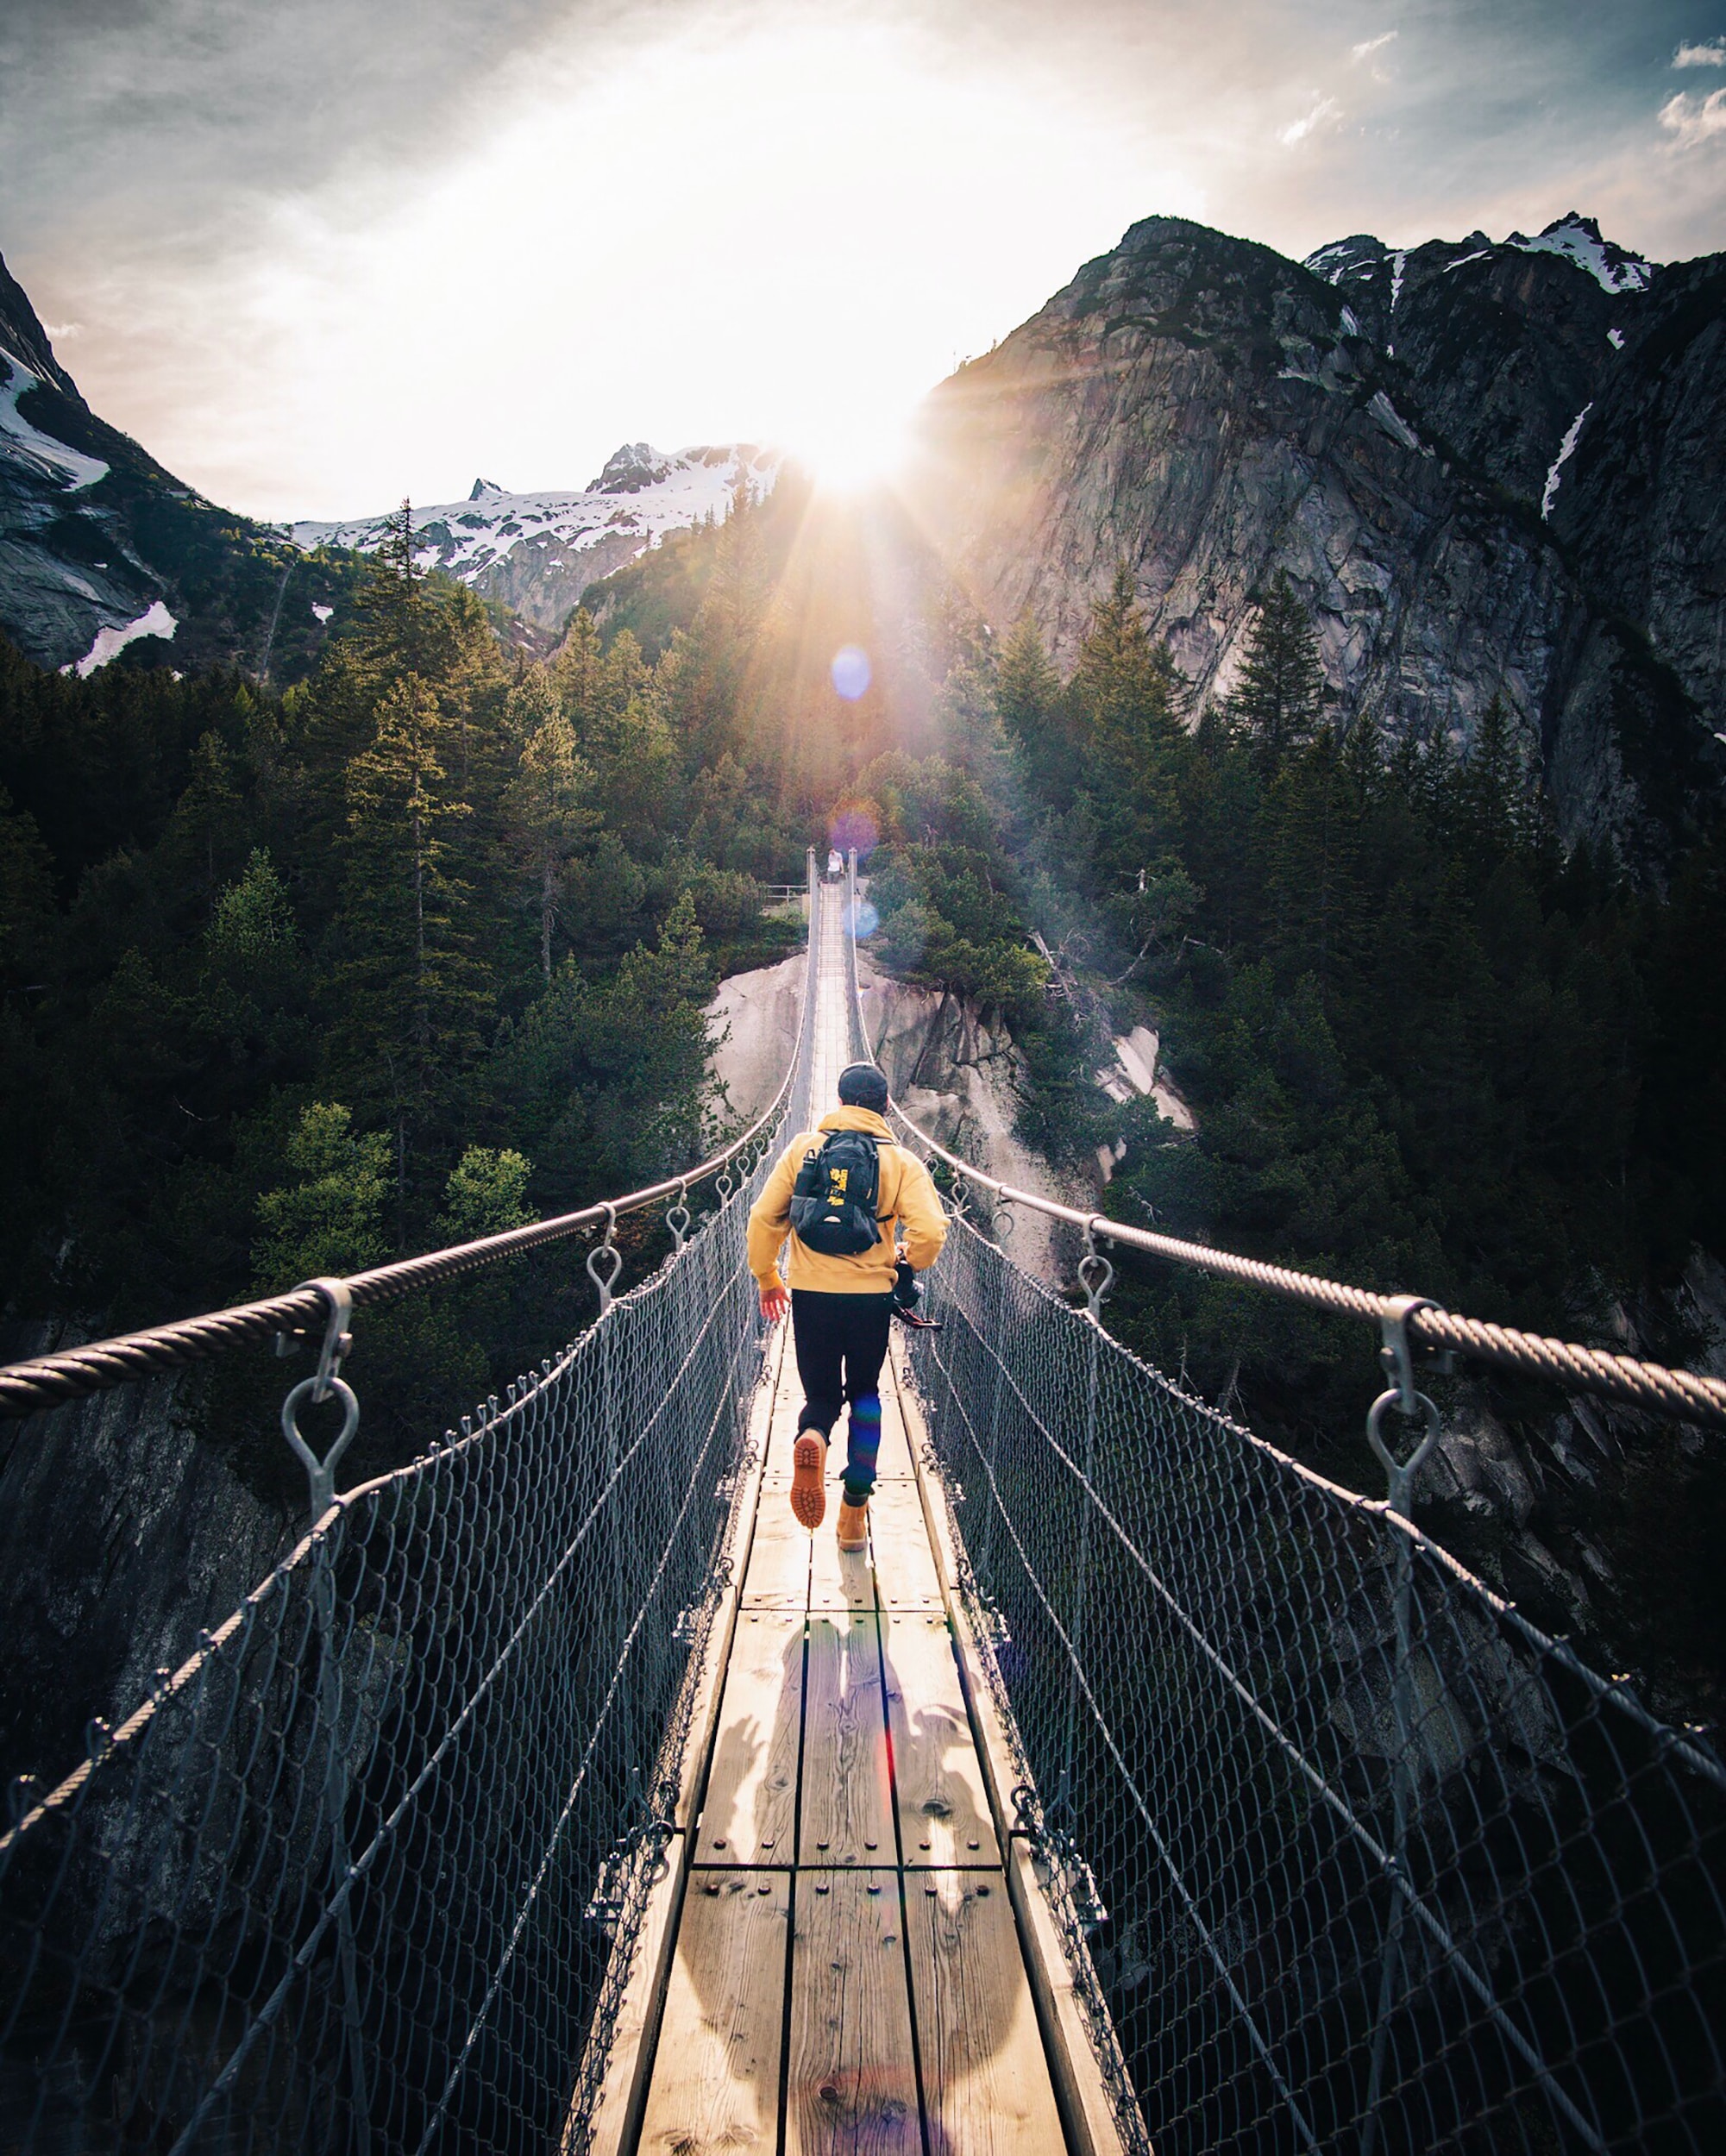 An individual running across the bridge in the mountains.│Source: Unsplash